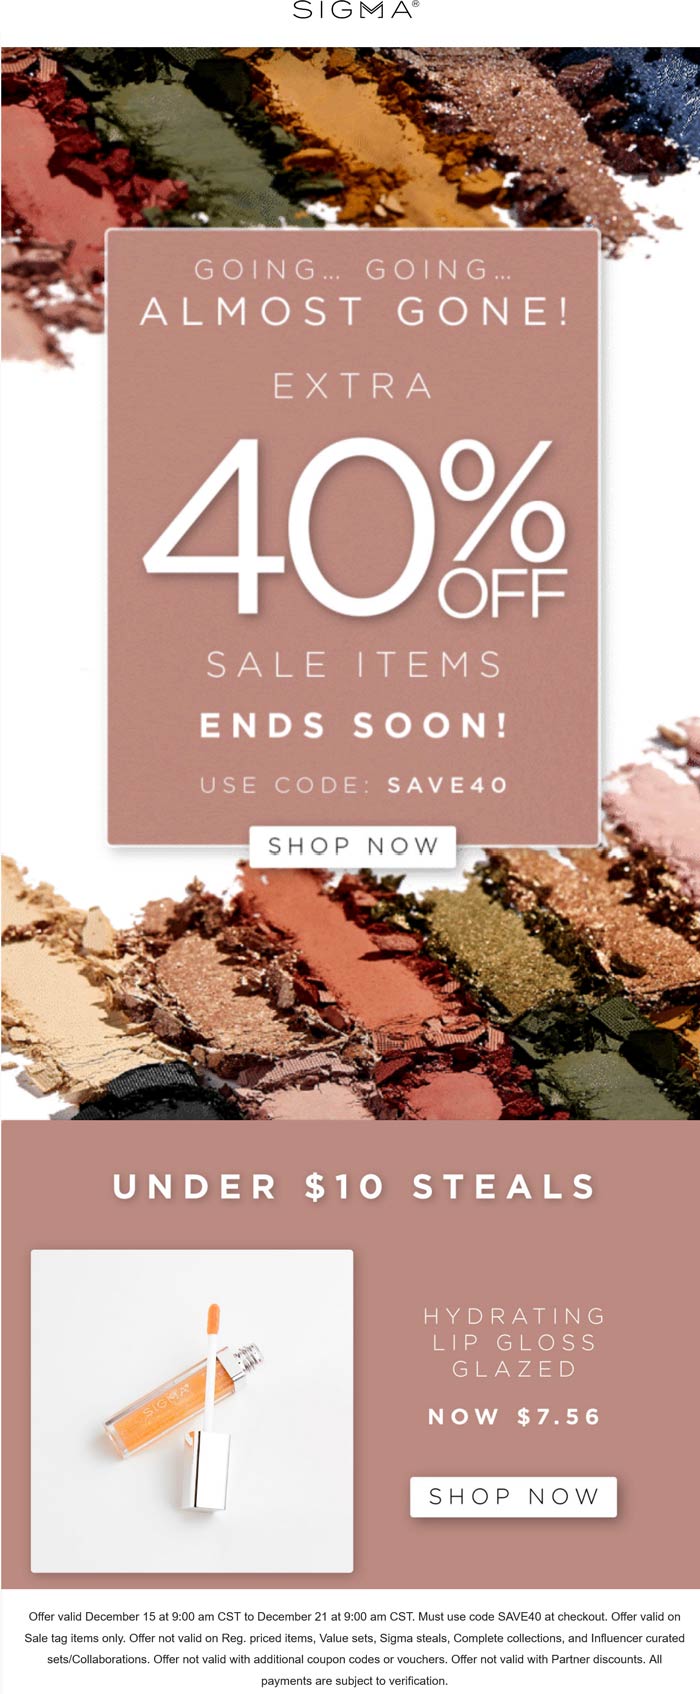 Sigma stores Coupon  Extra 40% off sale items at Sigma Beauty via promo code SAVE40 #sigma 